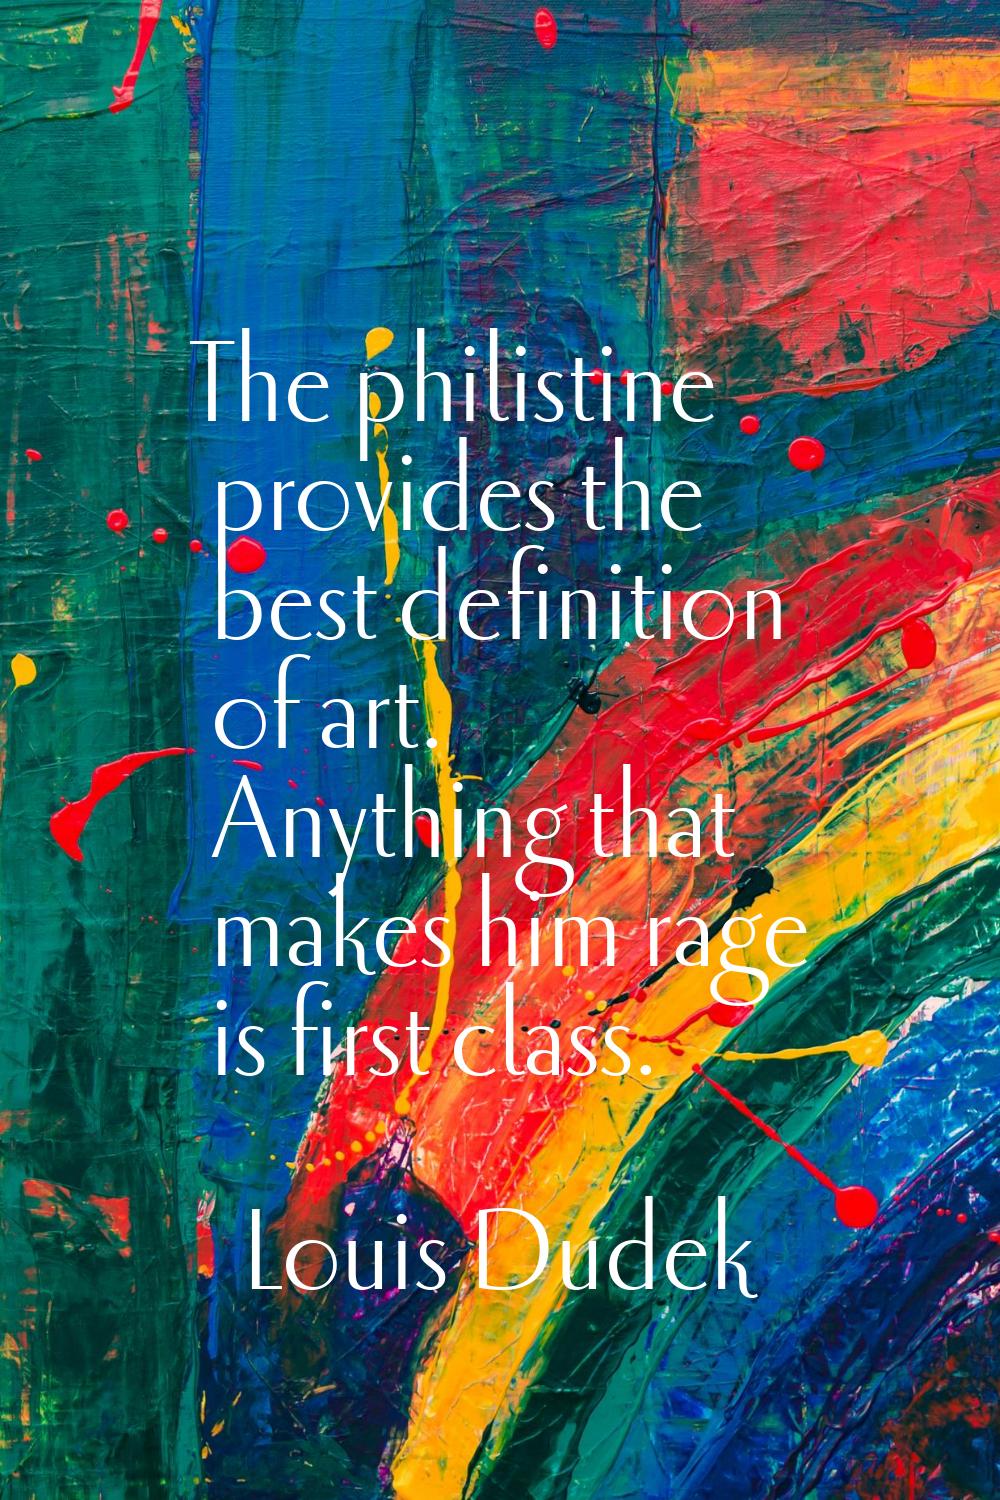 The philistine provides the best definition of art. Anything that makes him rage is first class.